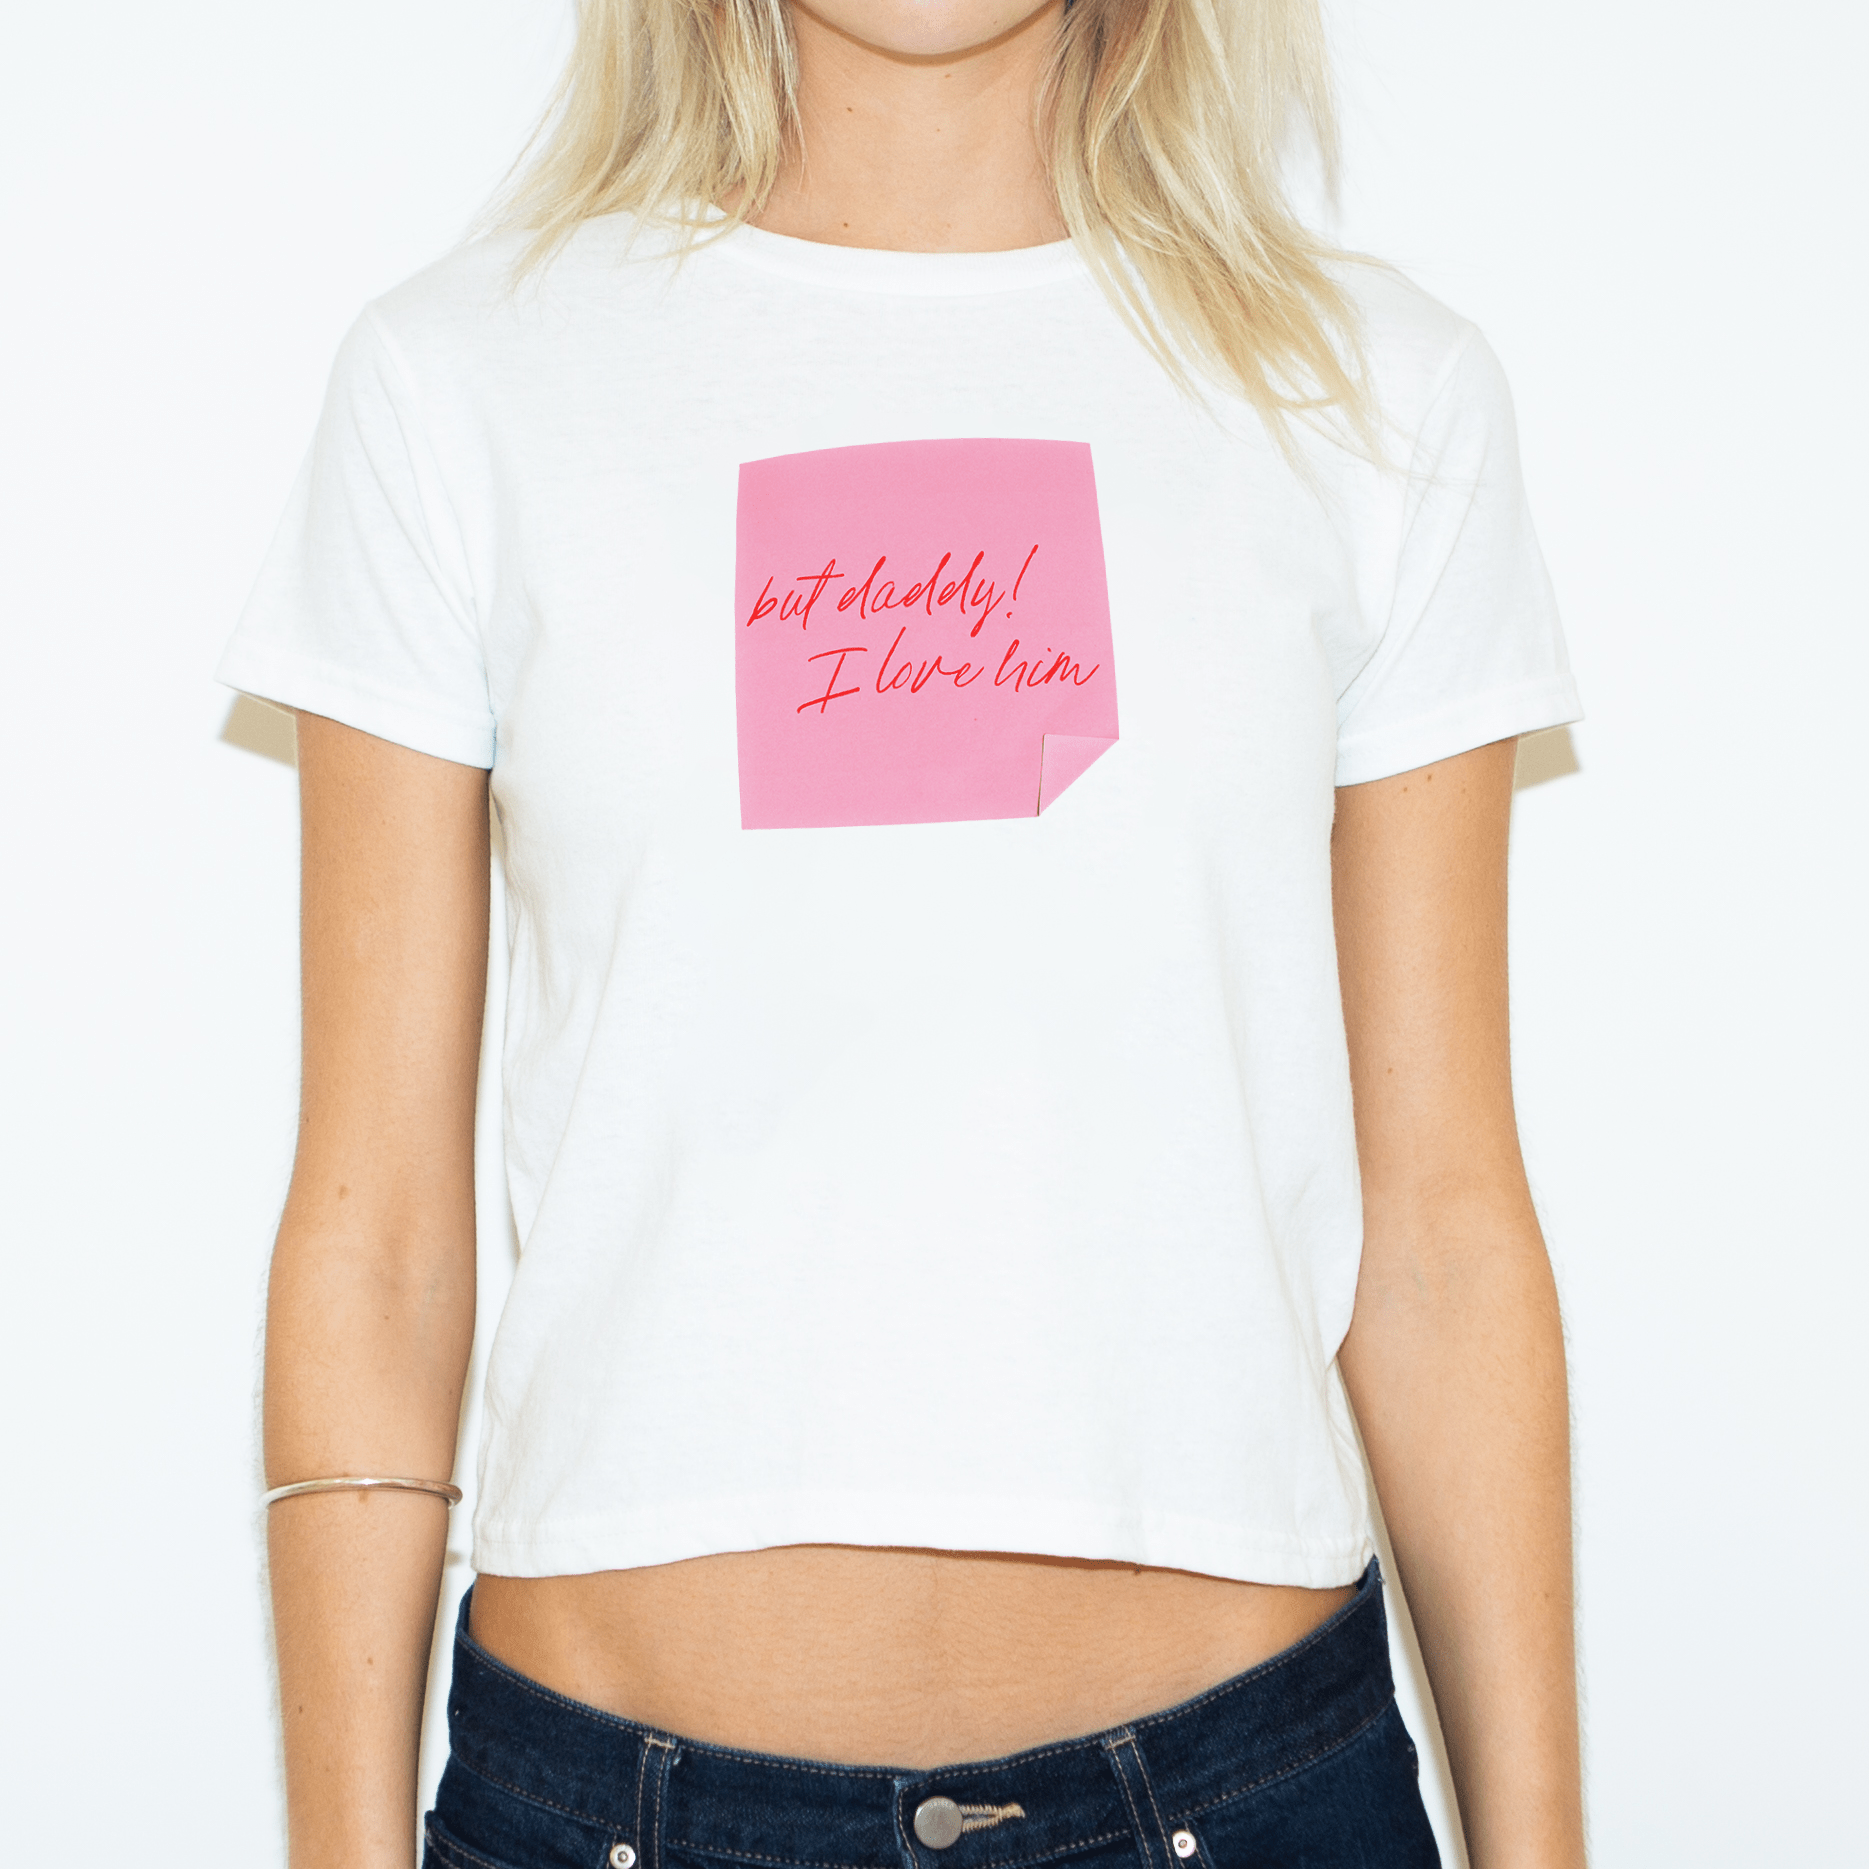 'But daddy! I love him' baby tee - In Print We Trust